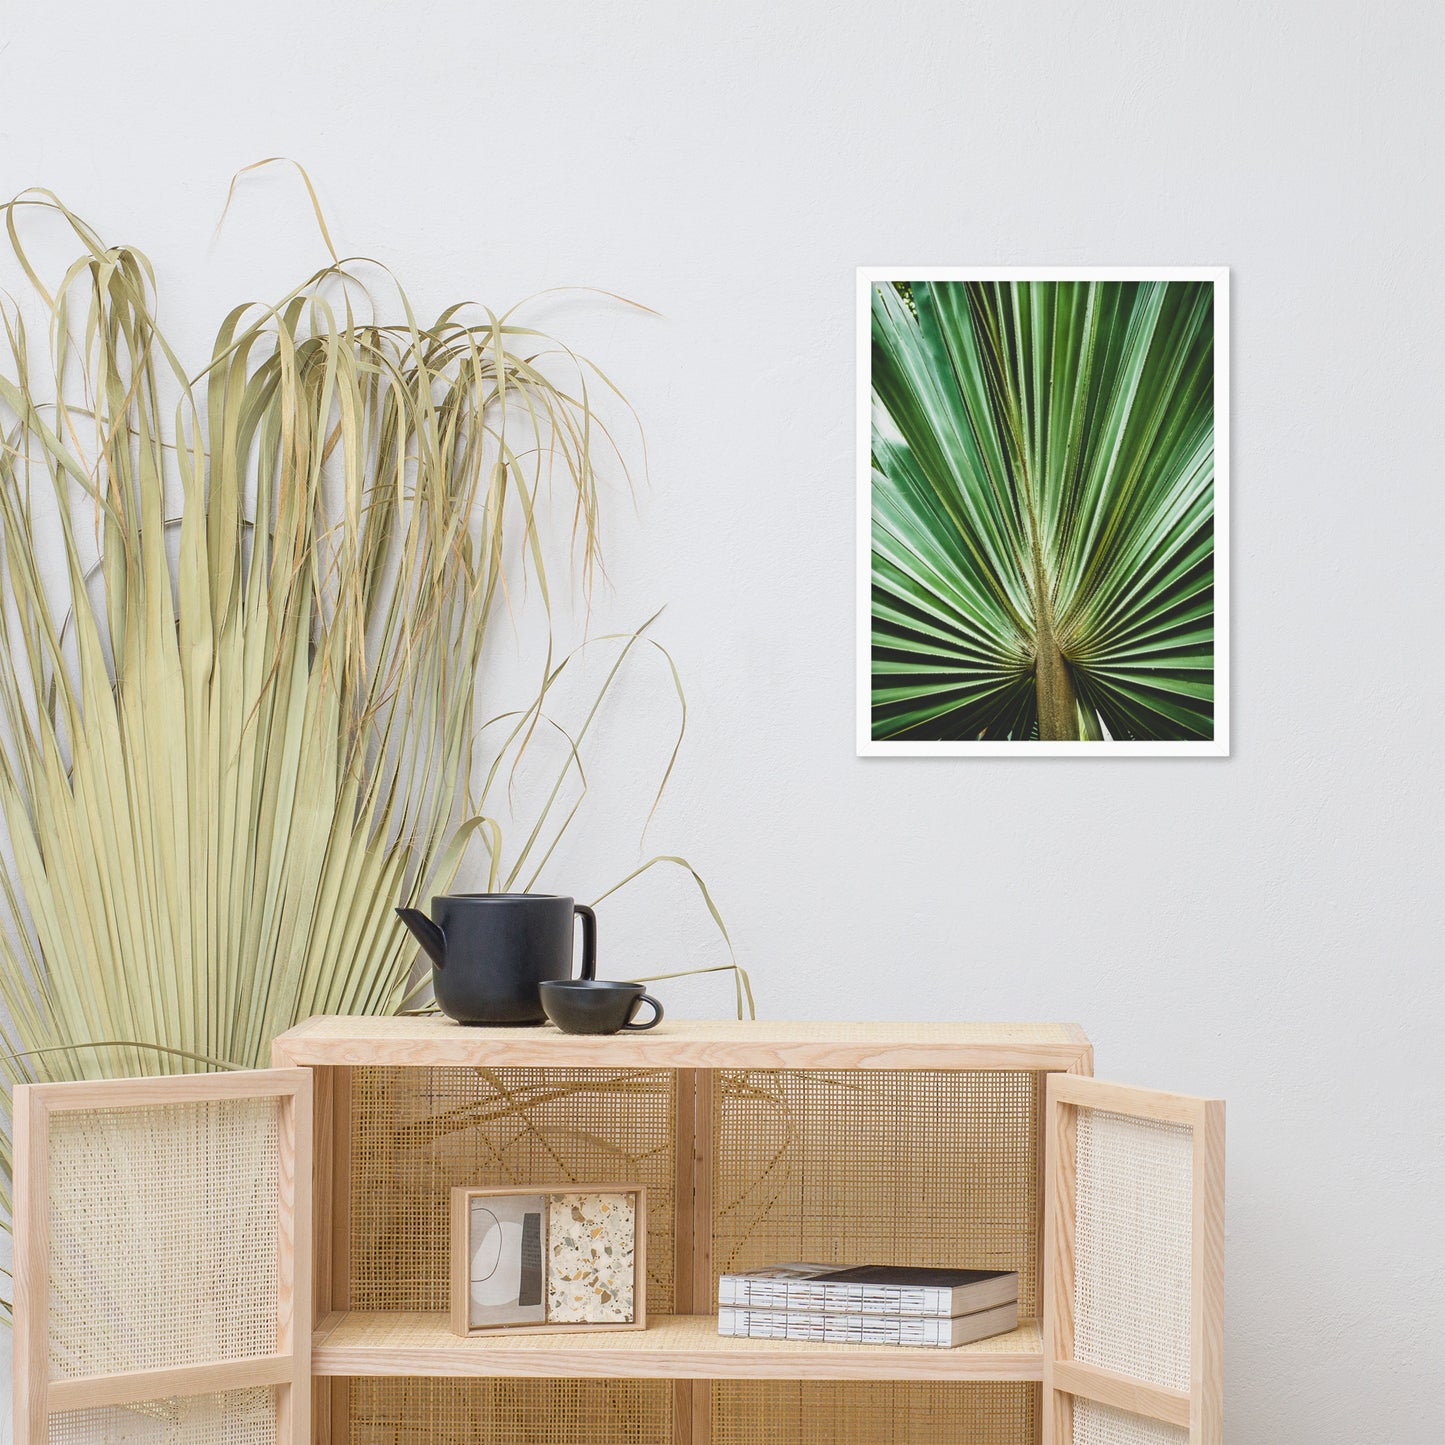 Rustic Wall Decor Dining Room: Aged and Colorized Wide Palm Leaves 2 Tropical Botanical / Nature Photo Framed Wall Art Print - Artwork - Wall Decor